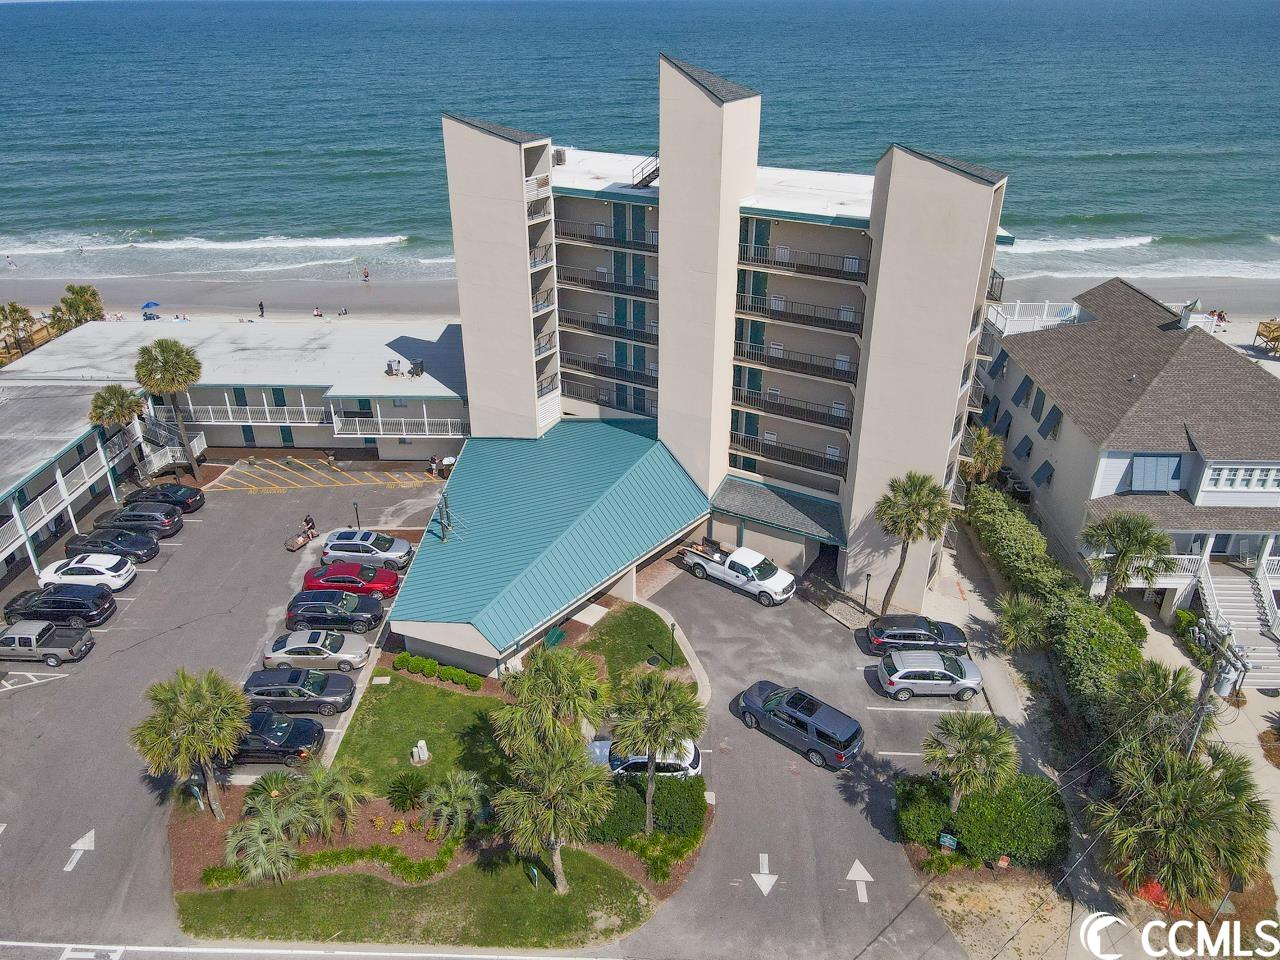 welcome to unit #330 in the oceanfront litchfield inn. this beachfront tower unit has breathtaking ocean views and a private balcony for enjoying the morning sunrises and summer breezes. the unit has a king bed, full bath and is fully furnished. the litchfield inn has multiple swimming pools, private beach access and two restaurants on property. this would make a great beach retreat or rental investment property. don’t miss this opportunity to own one of the most popular oceanfront units at litchfield beach.